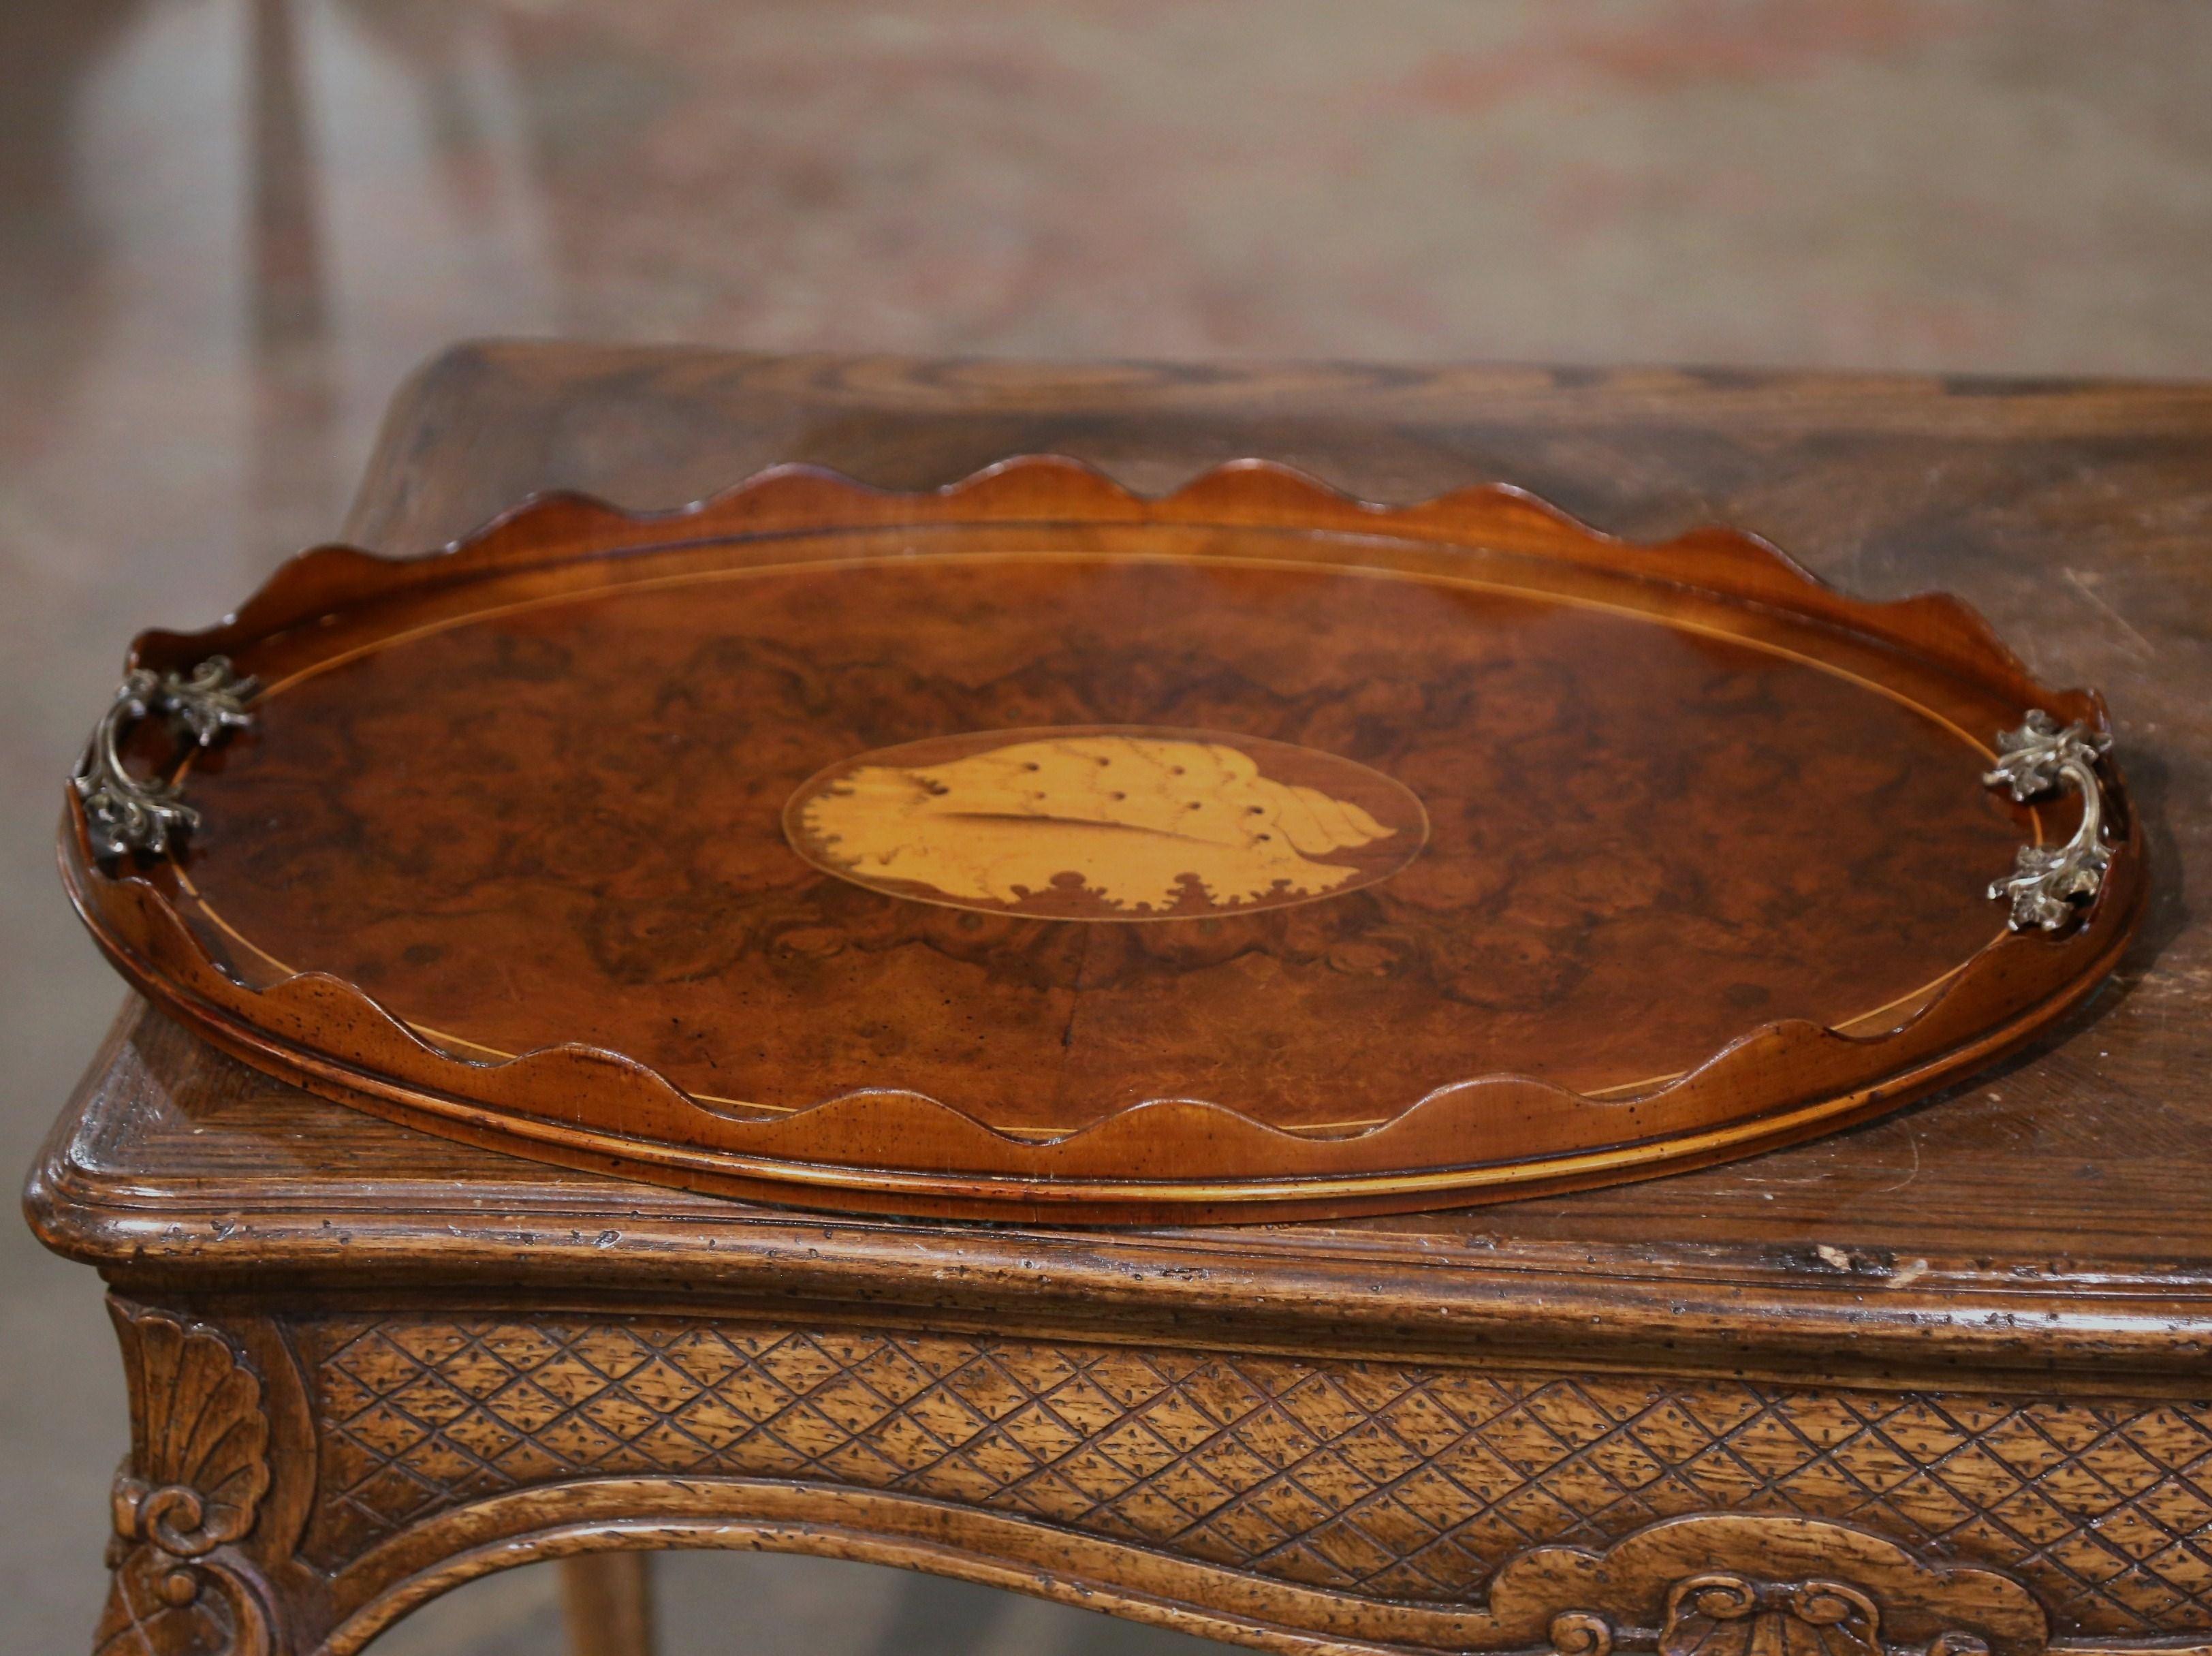 19th Century English Burl Walnut and Bronze Tray Table with Inlaid Shell Decor For Sale 3